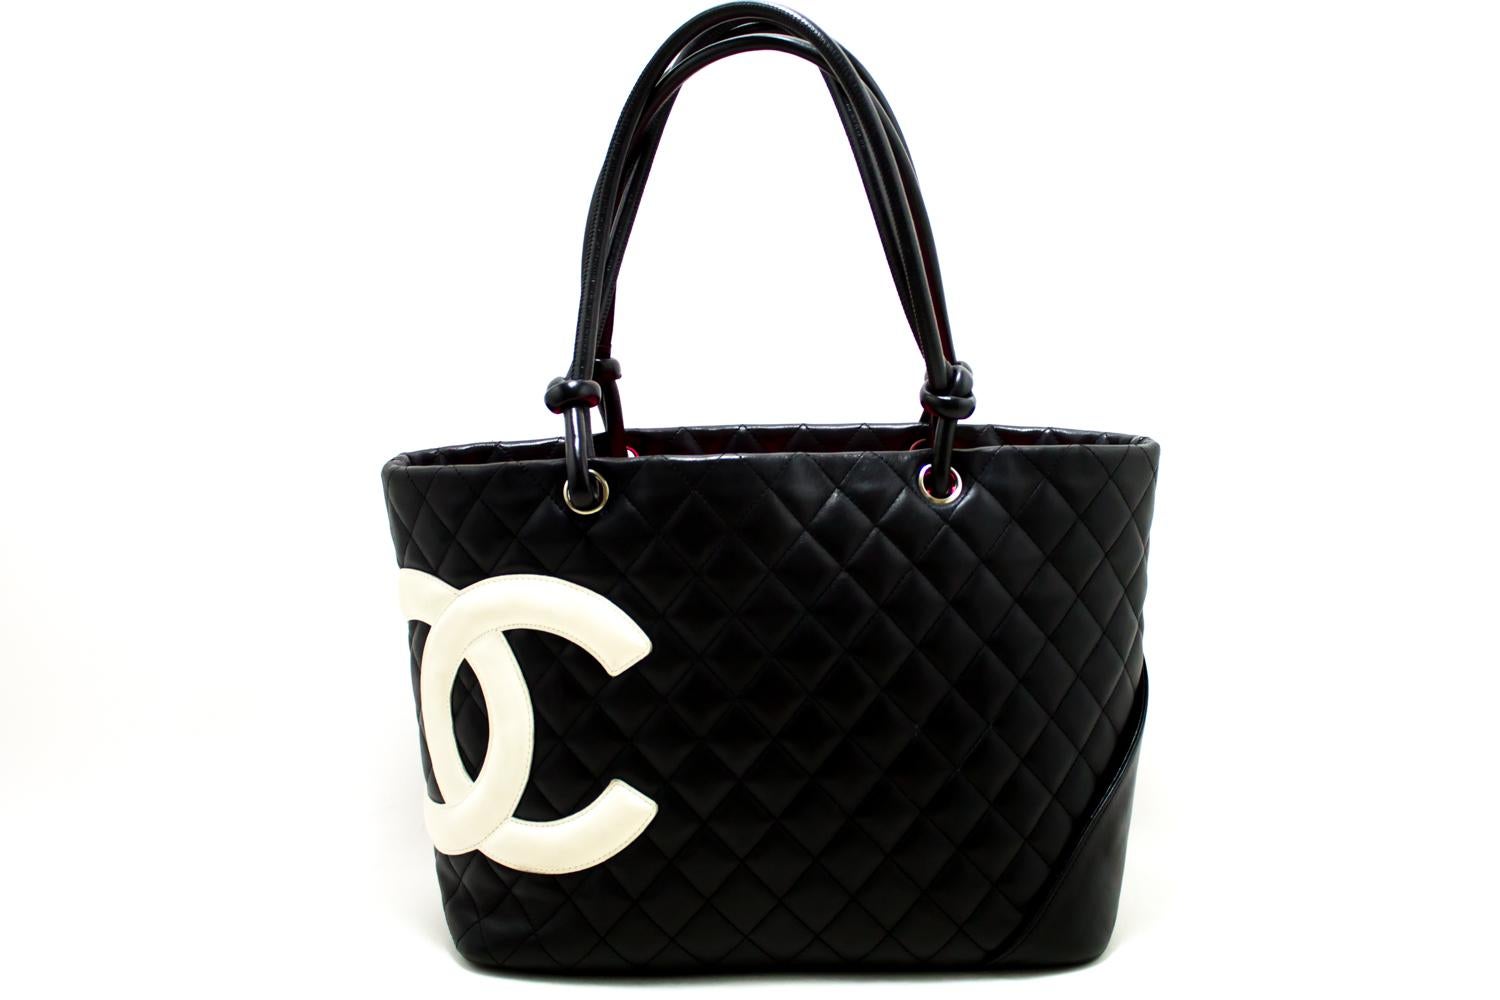 An authentic CHANEL Cambon Ligne Tote Large Shoulder Bag Black White Quilted Calfskin. The color is Black. The outside material is Leather. The pattern is Solid.
Conditions & Ratings
Outside material: Calfskin
Color: Black
Closure: Zipper
Hardware: